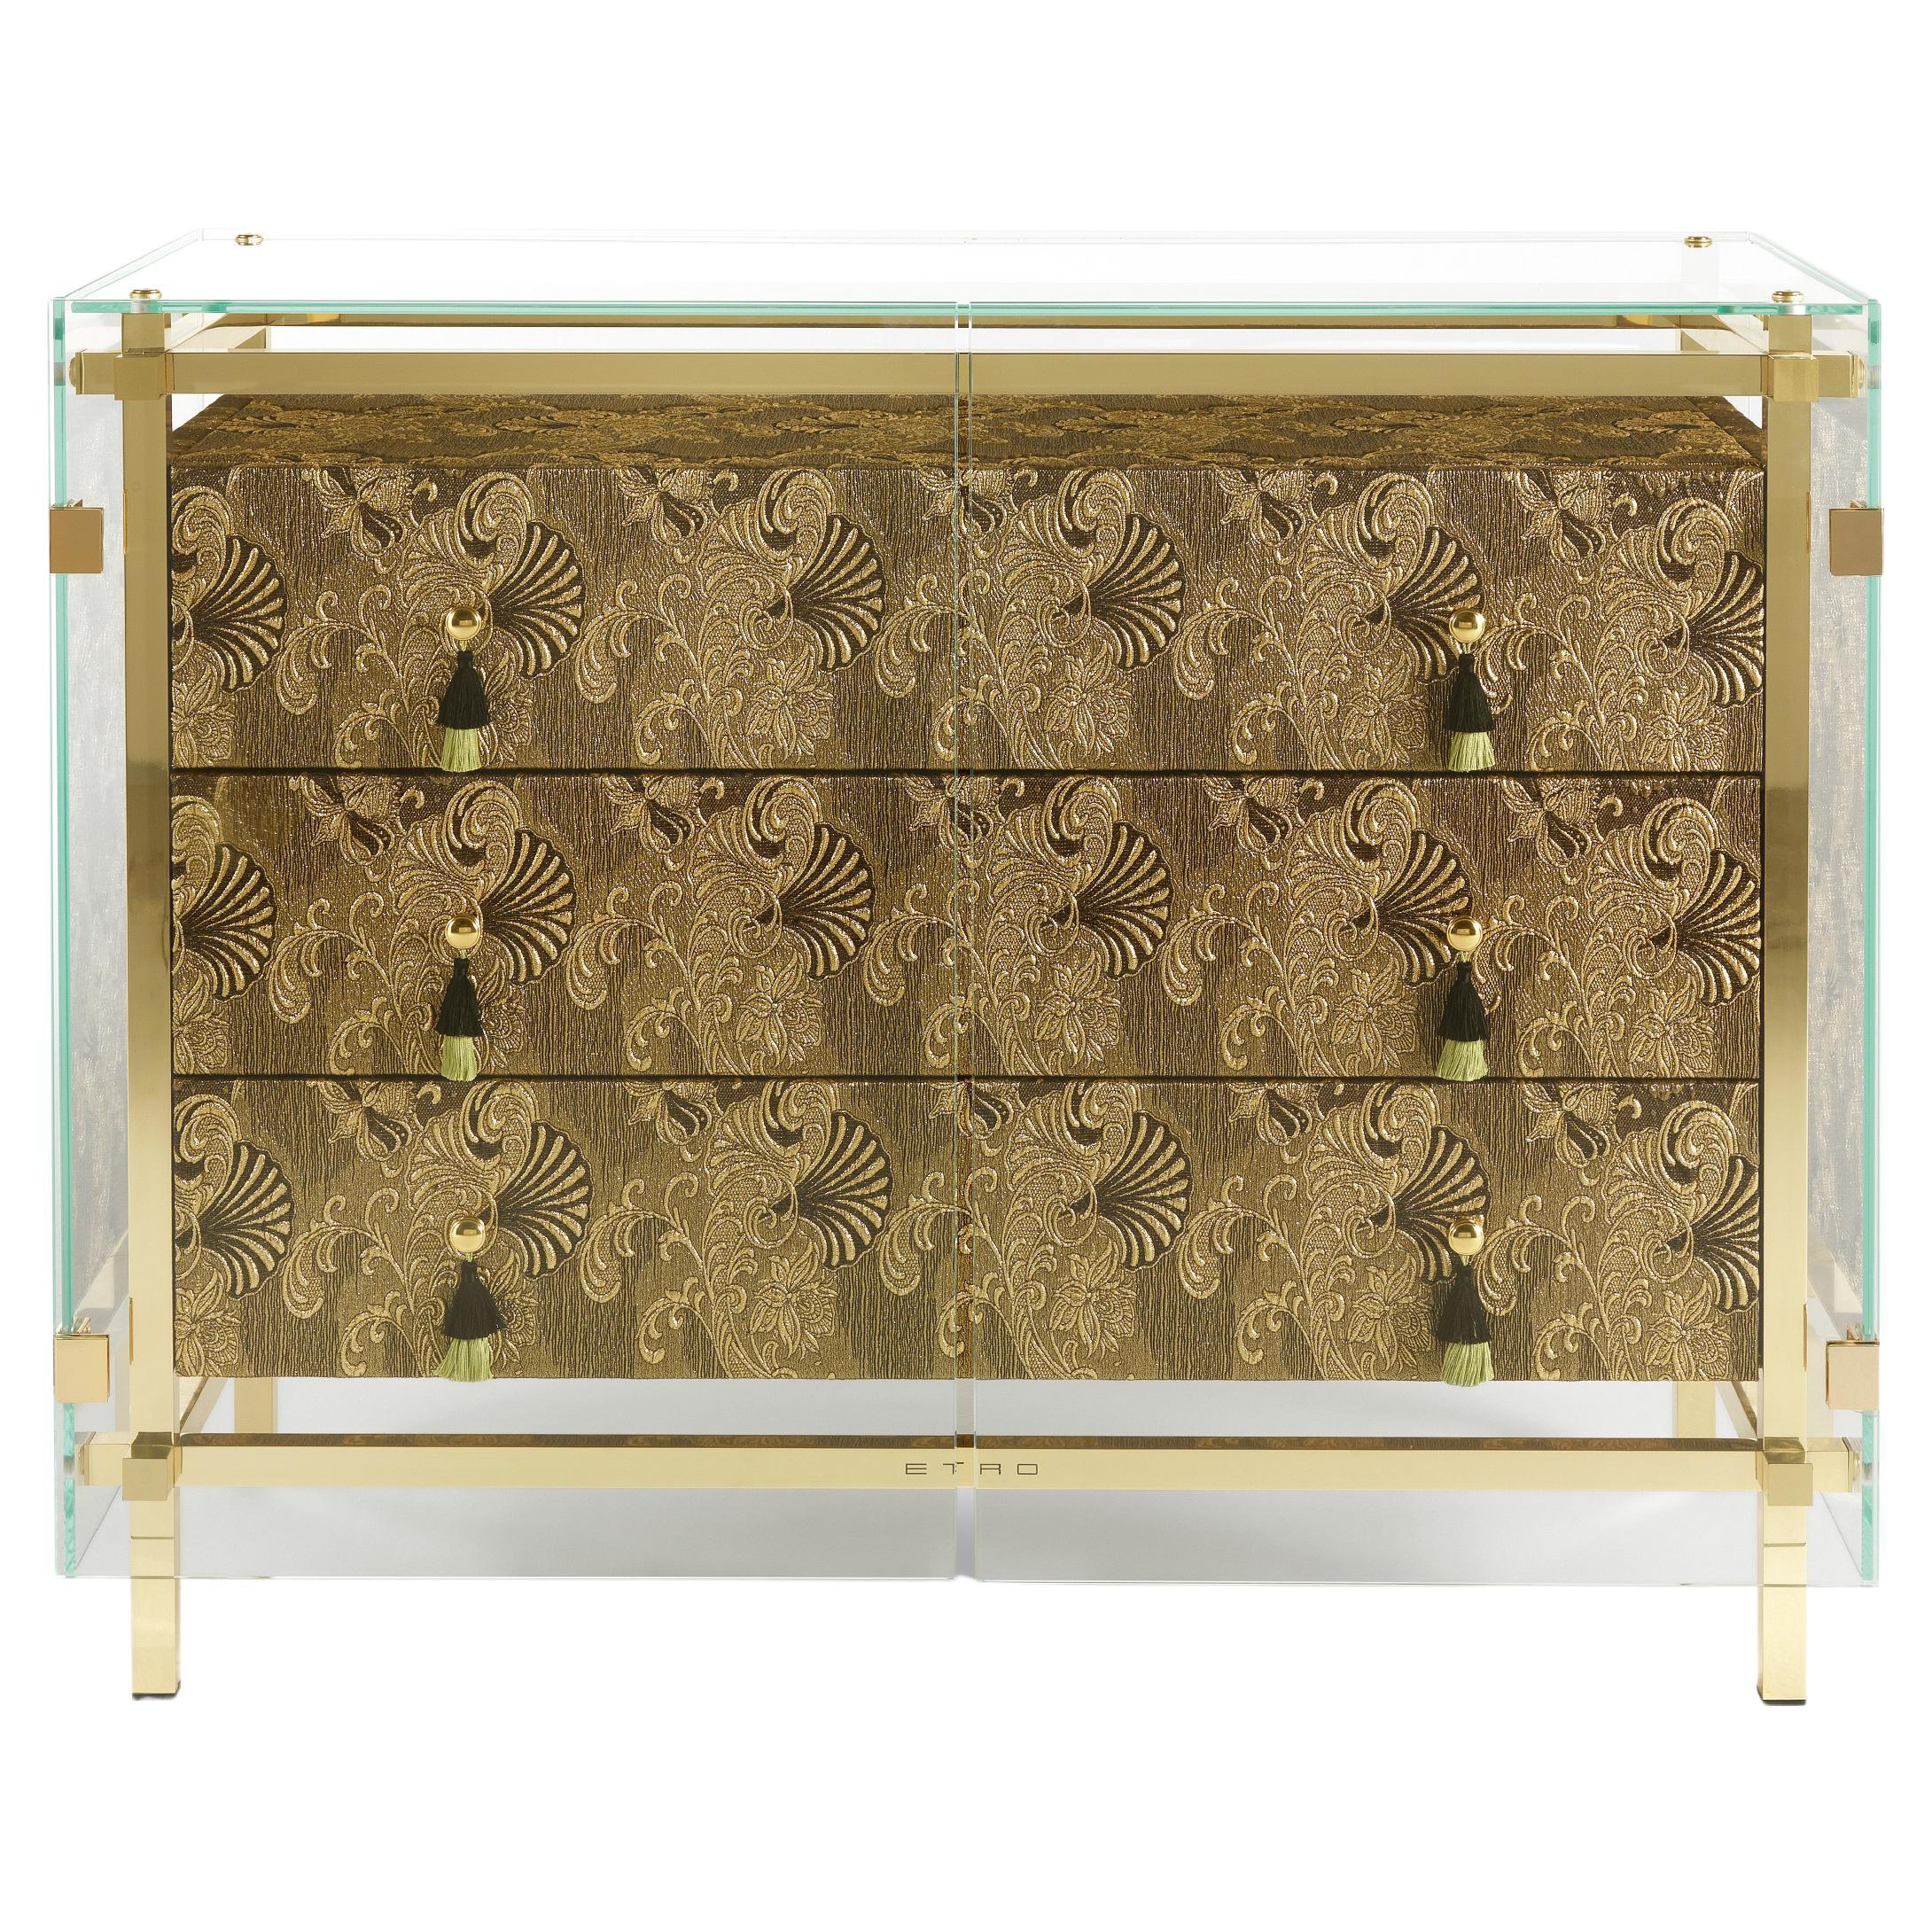 Etro Home Interiors Delhi Chest of Drawers in Fabric and Polished Brass